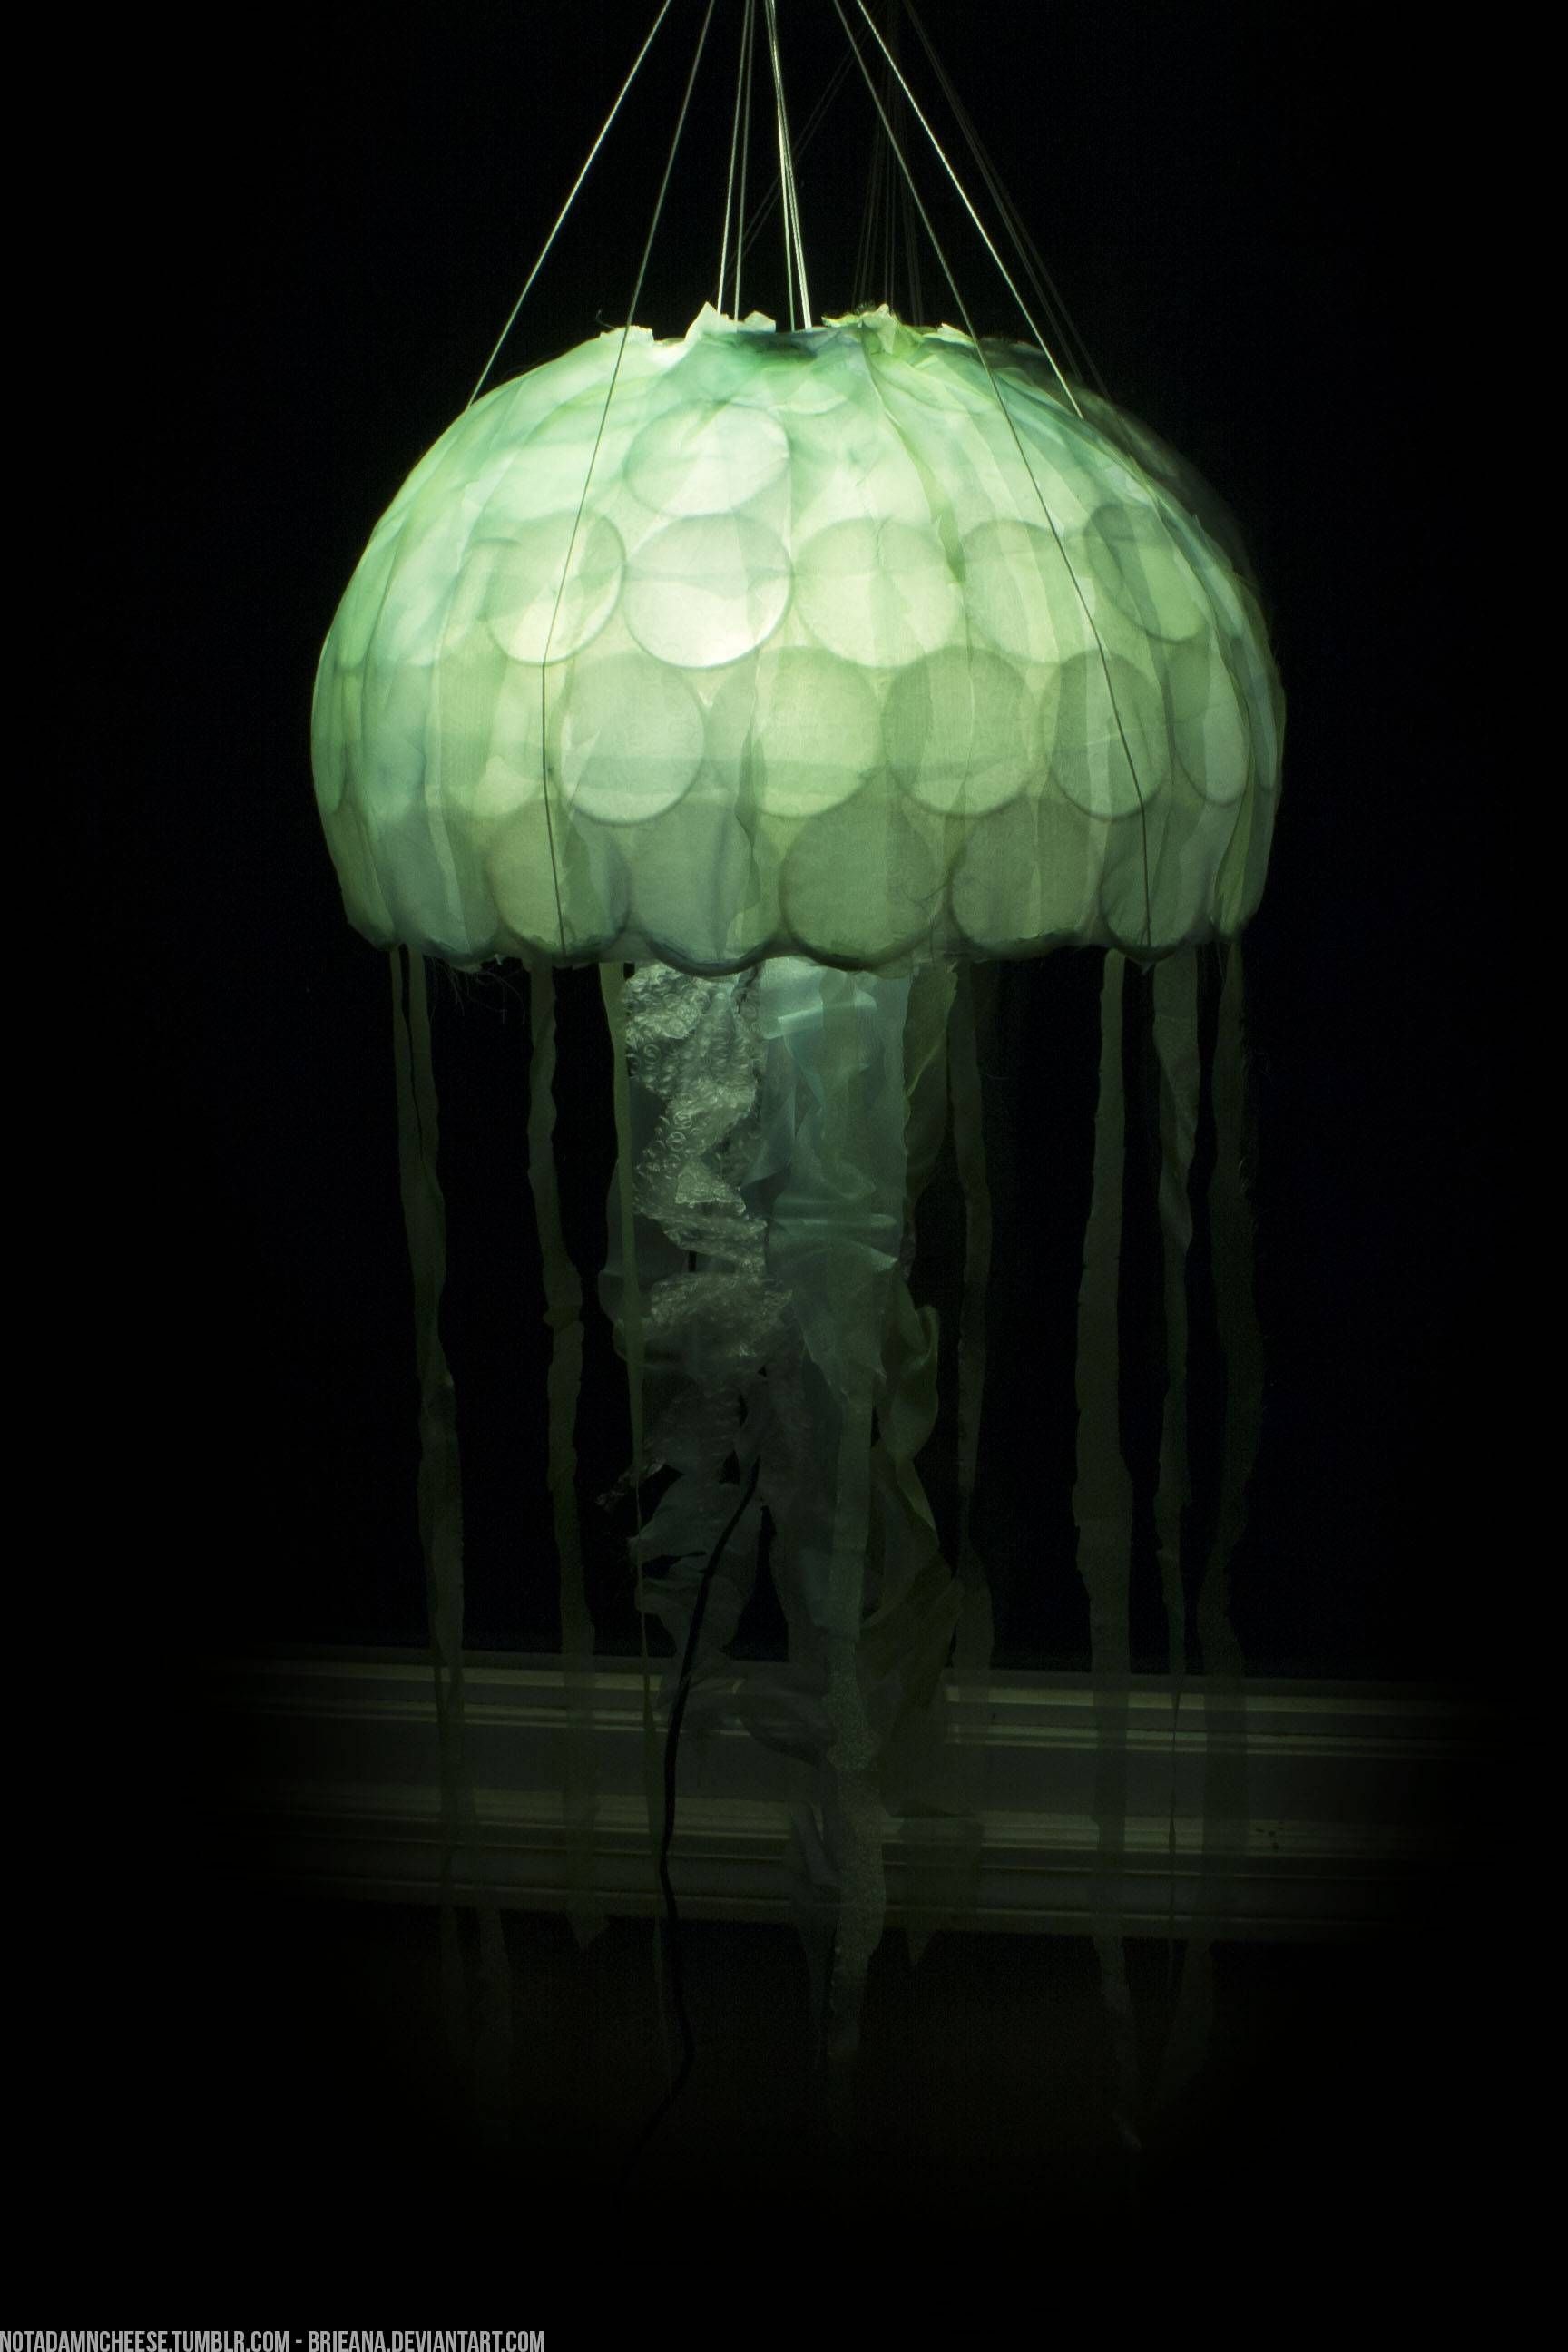 Jellyfish Lamps – 10 Reasons To Buy | Warisan Lighting In Jellyfish Lights Shades (View 5 of 15)